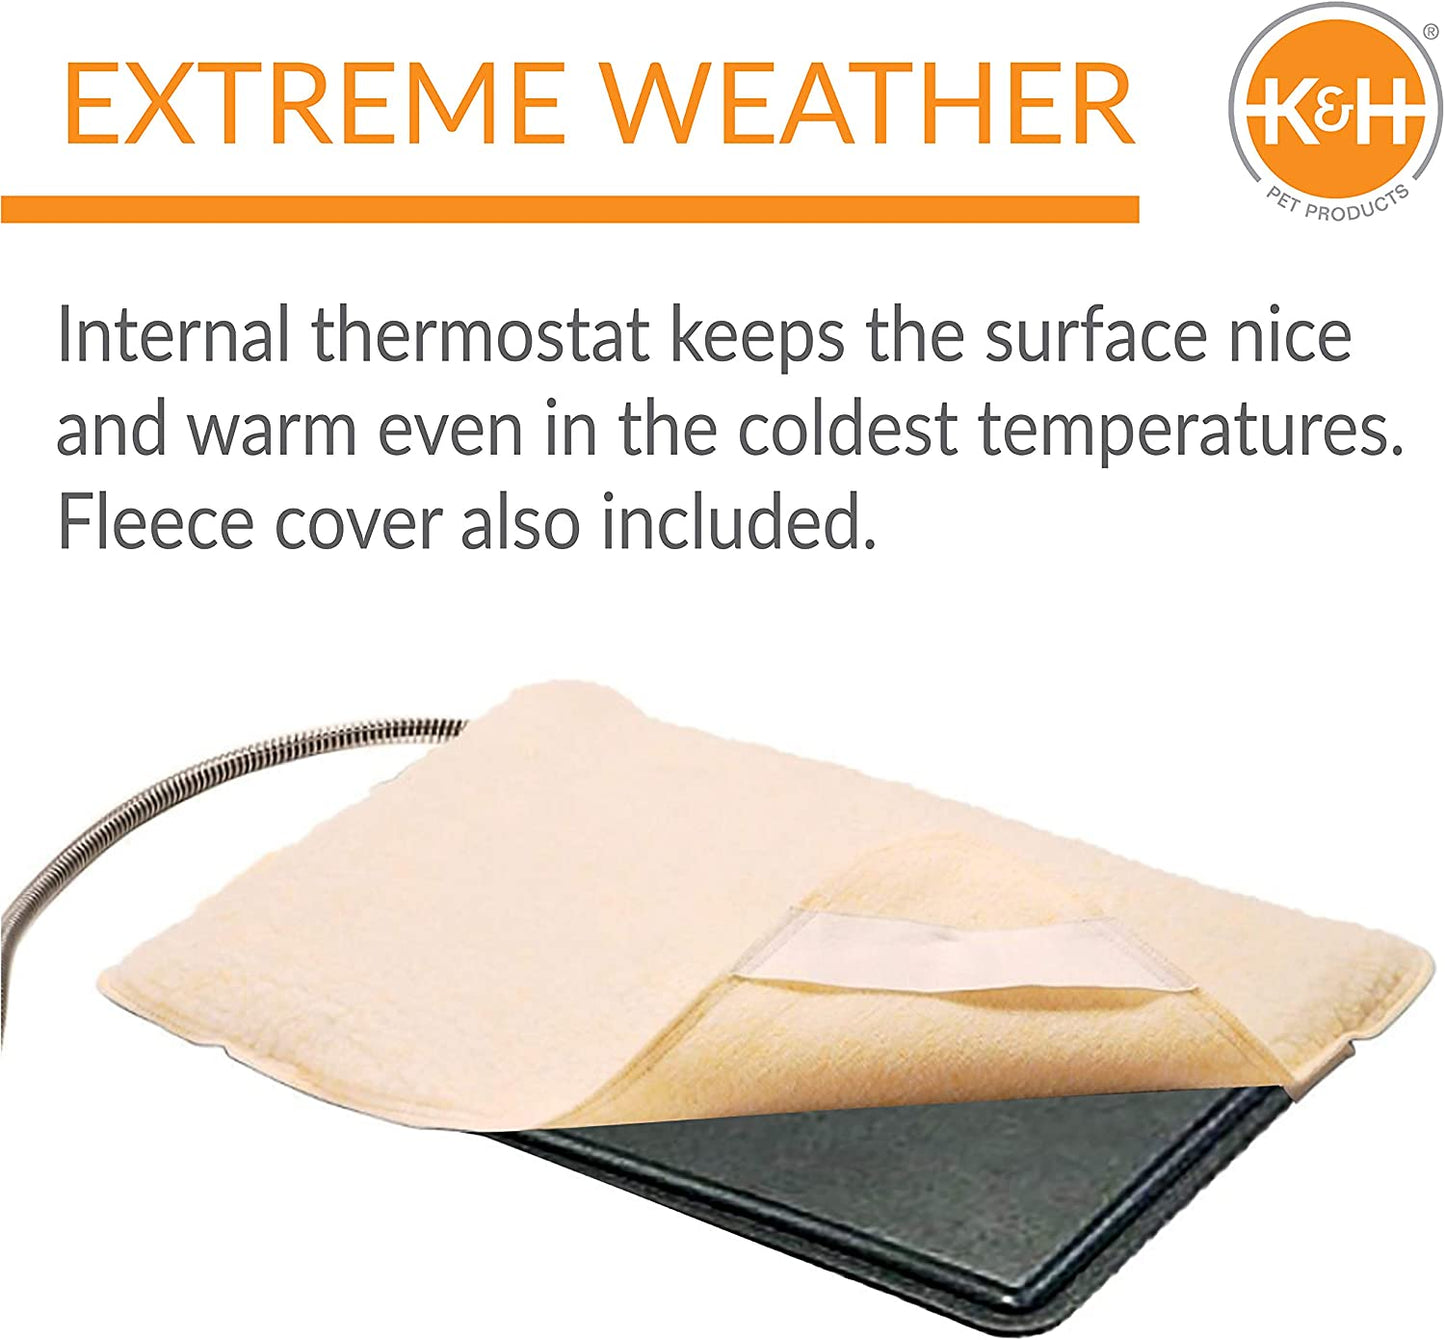 K&H Pet Products Extreme Weather Cat Heating Pad Outdoor, Heated, for Indoor and Outdoor Use Black Small 12.5 X 18.5 Inches 40W